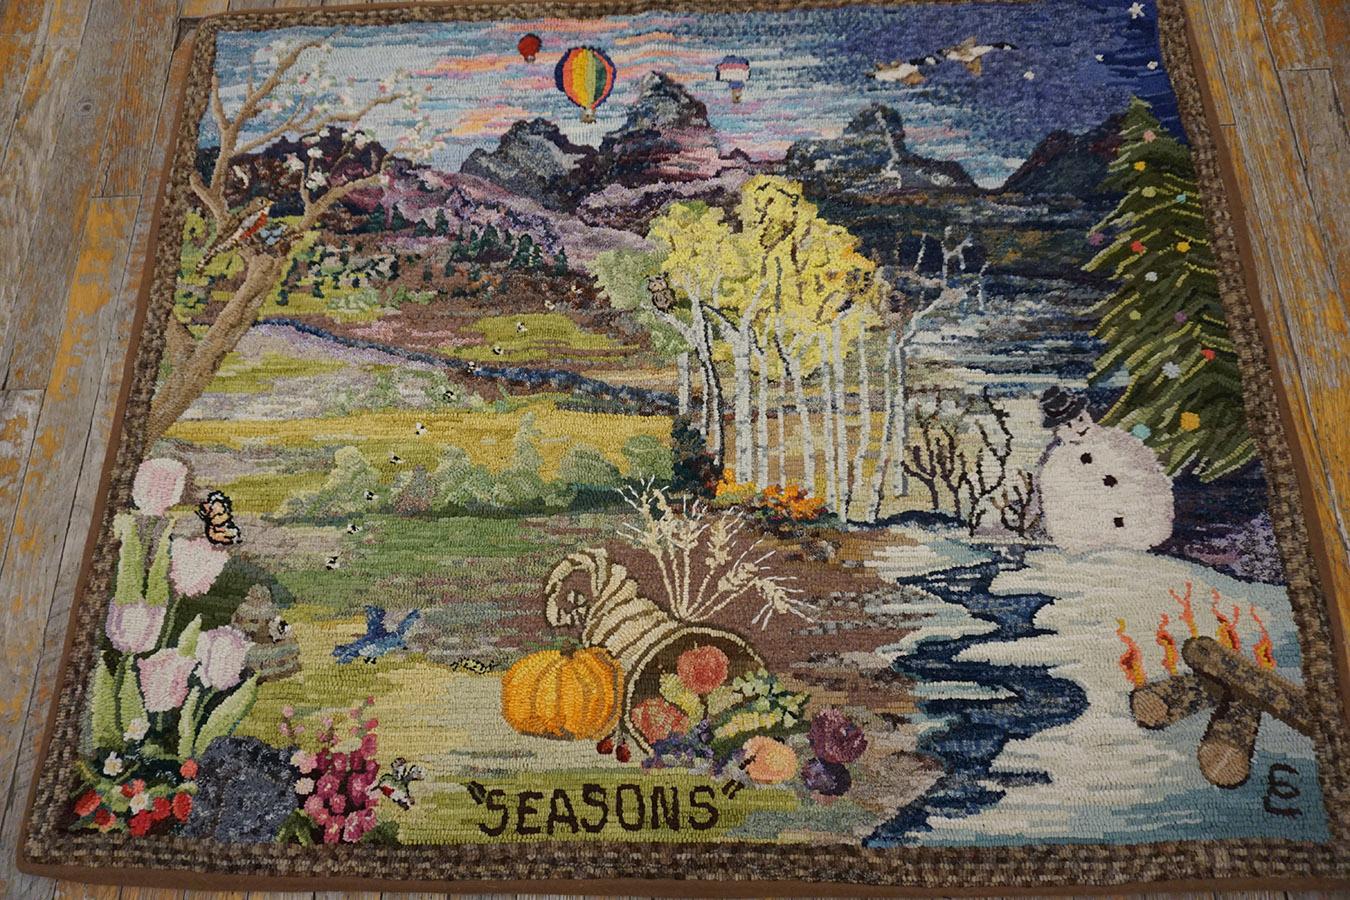 Hand-Woven Mid 20th Century Scenic American Hooked Rug ( 3'2